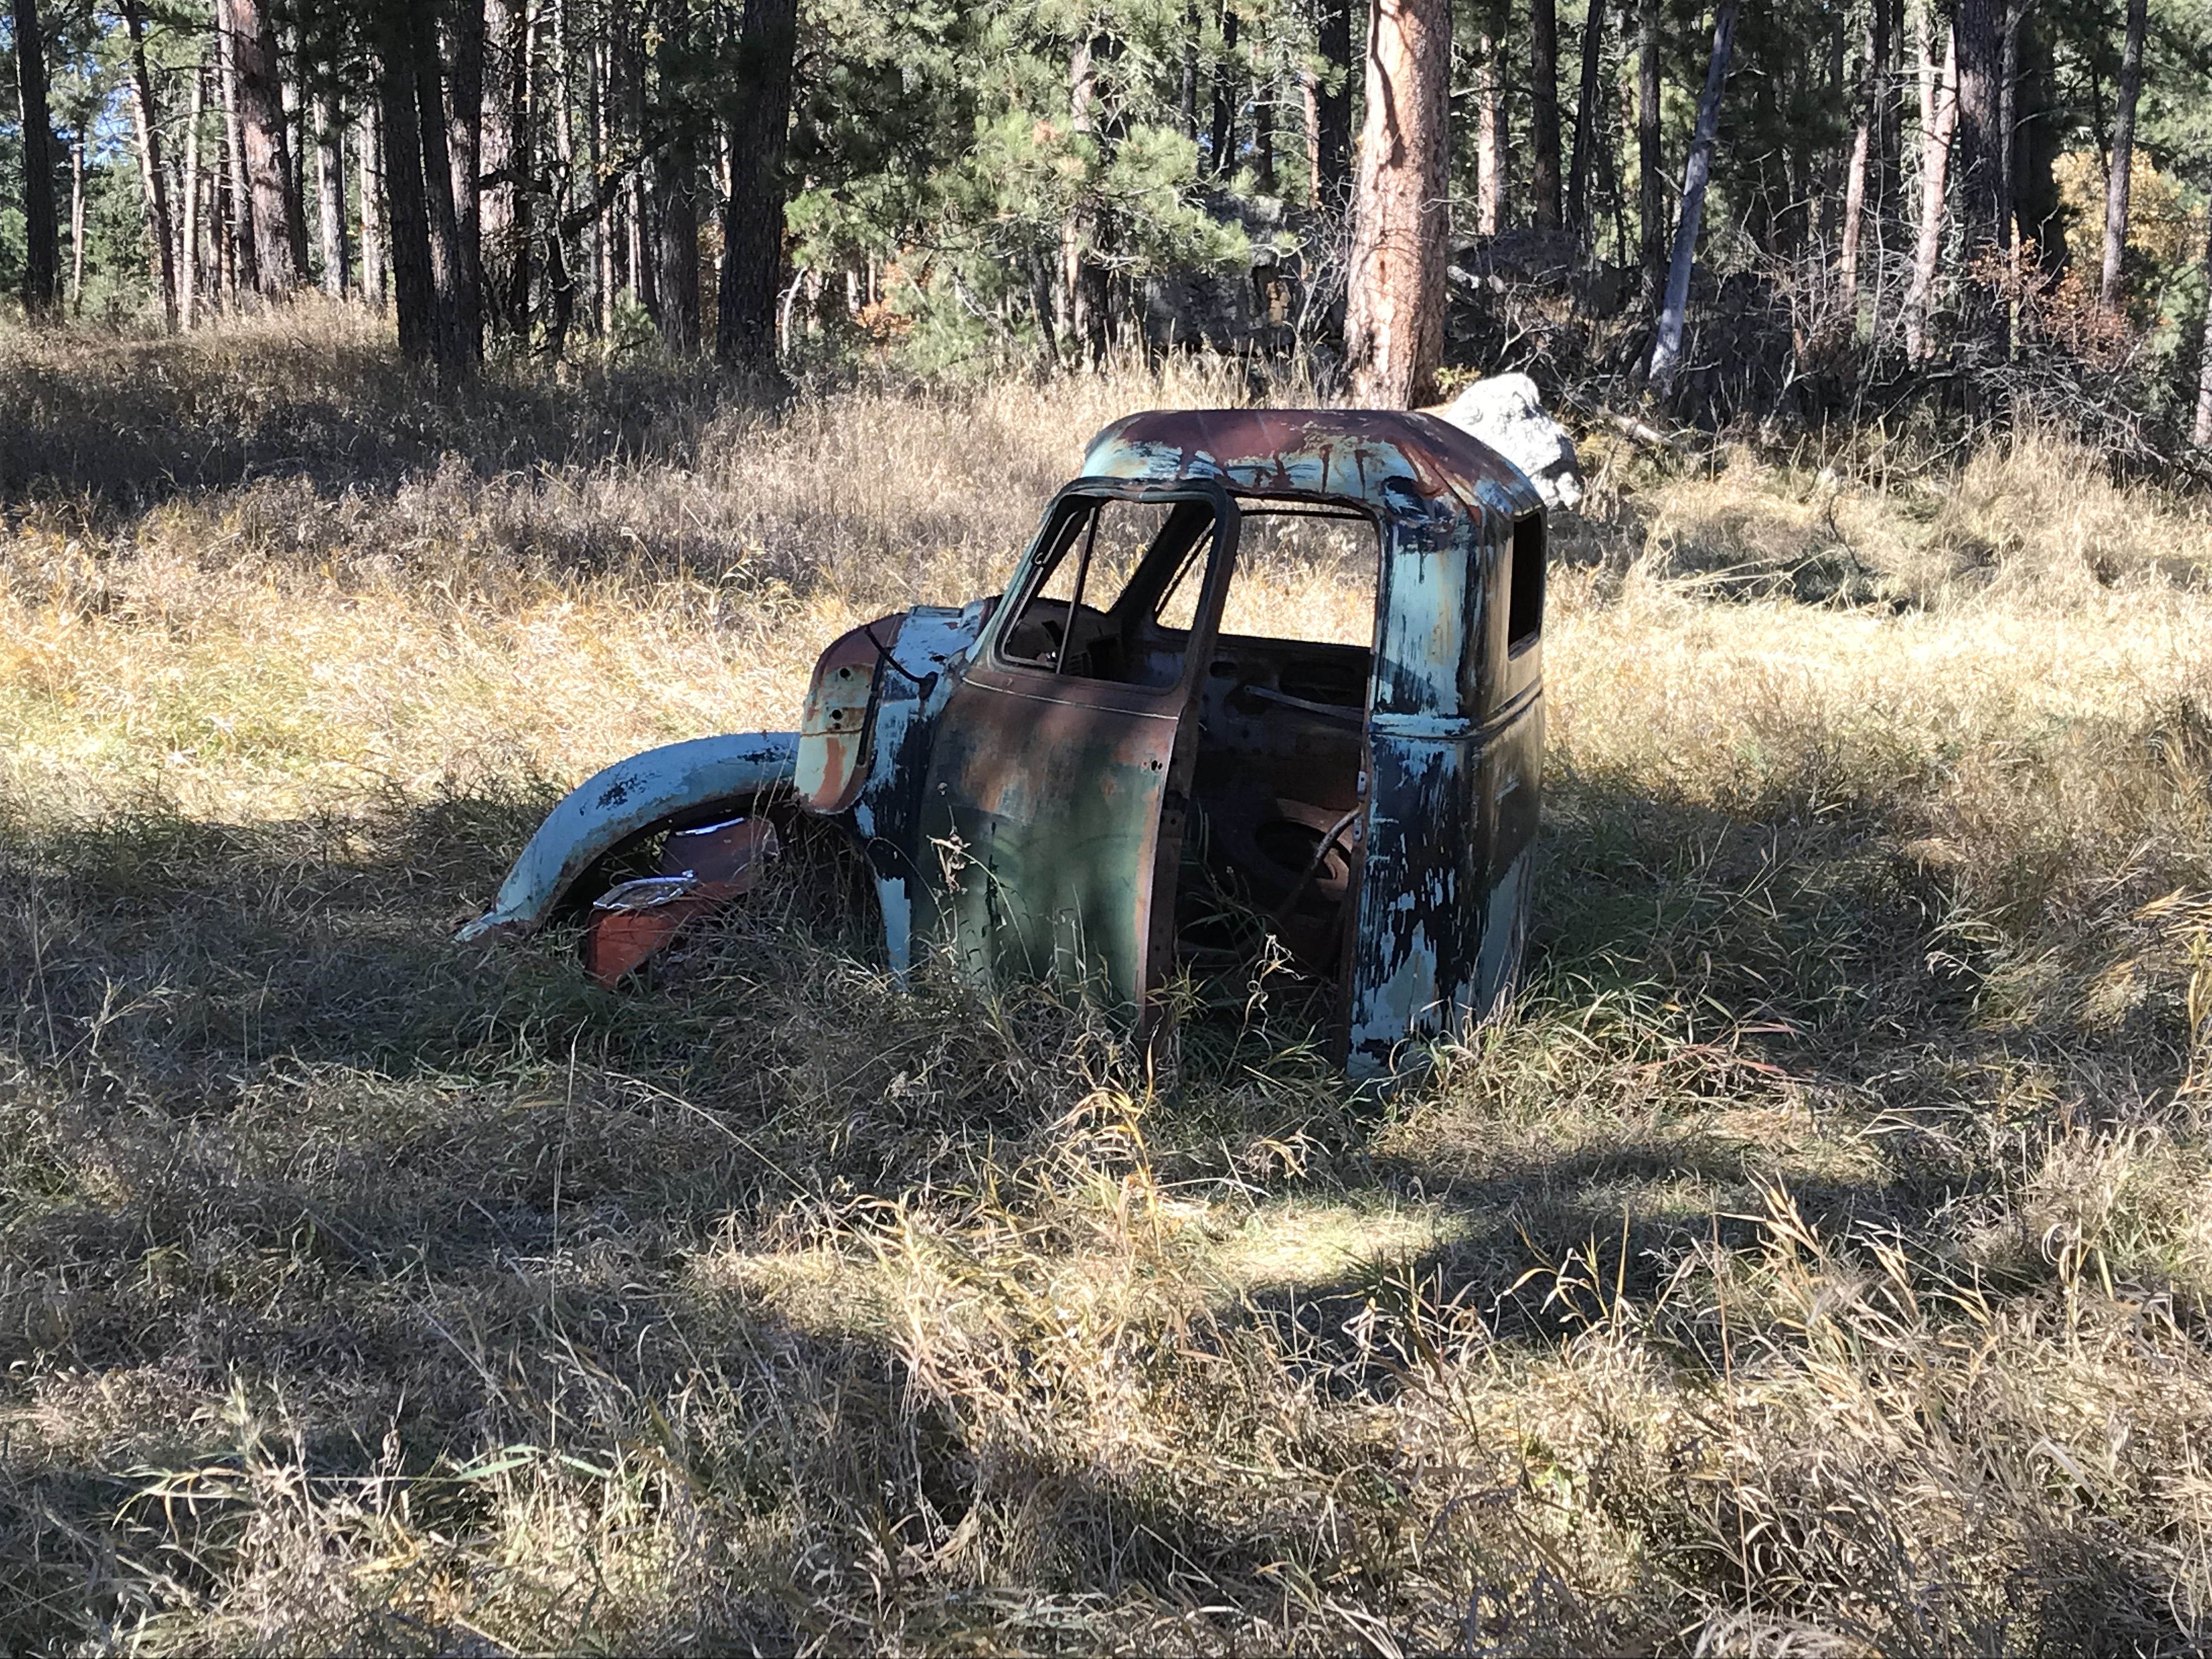 The cab of a rusted, old truck with no windows sits on the ground, in a meadow, surrounded by trees. 